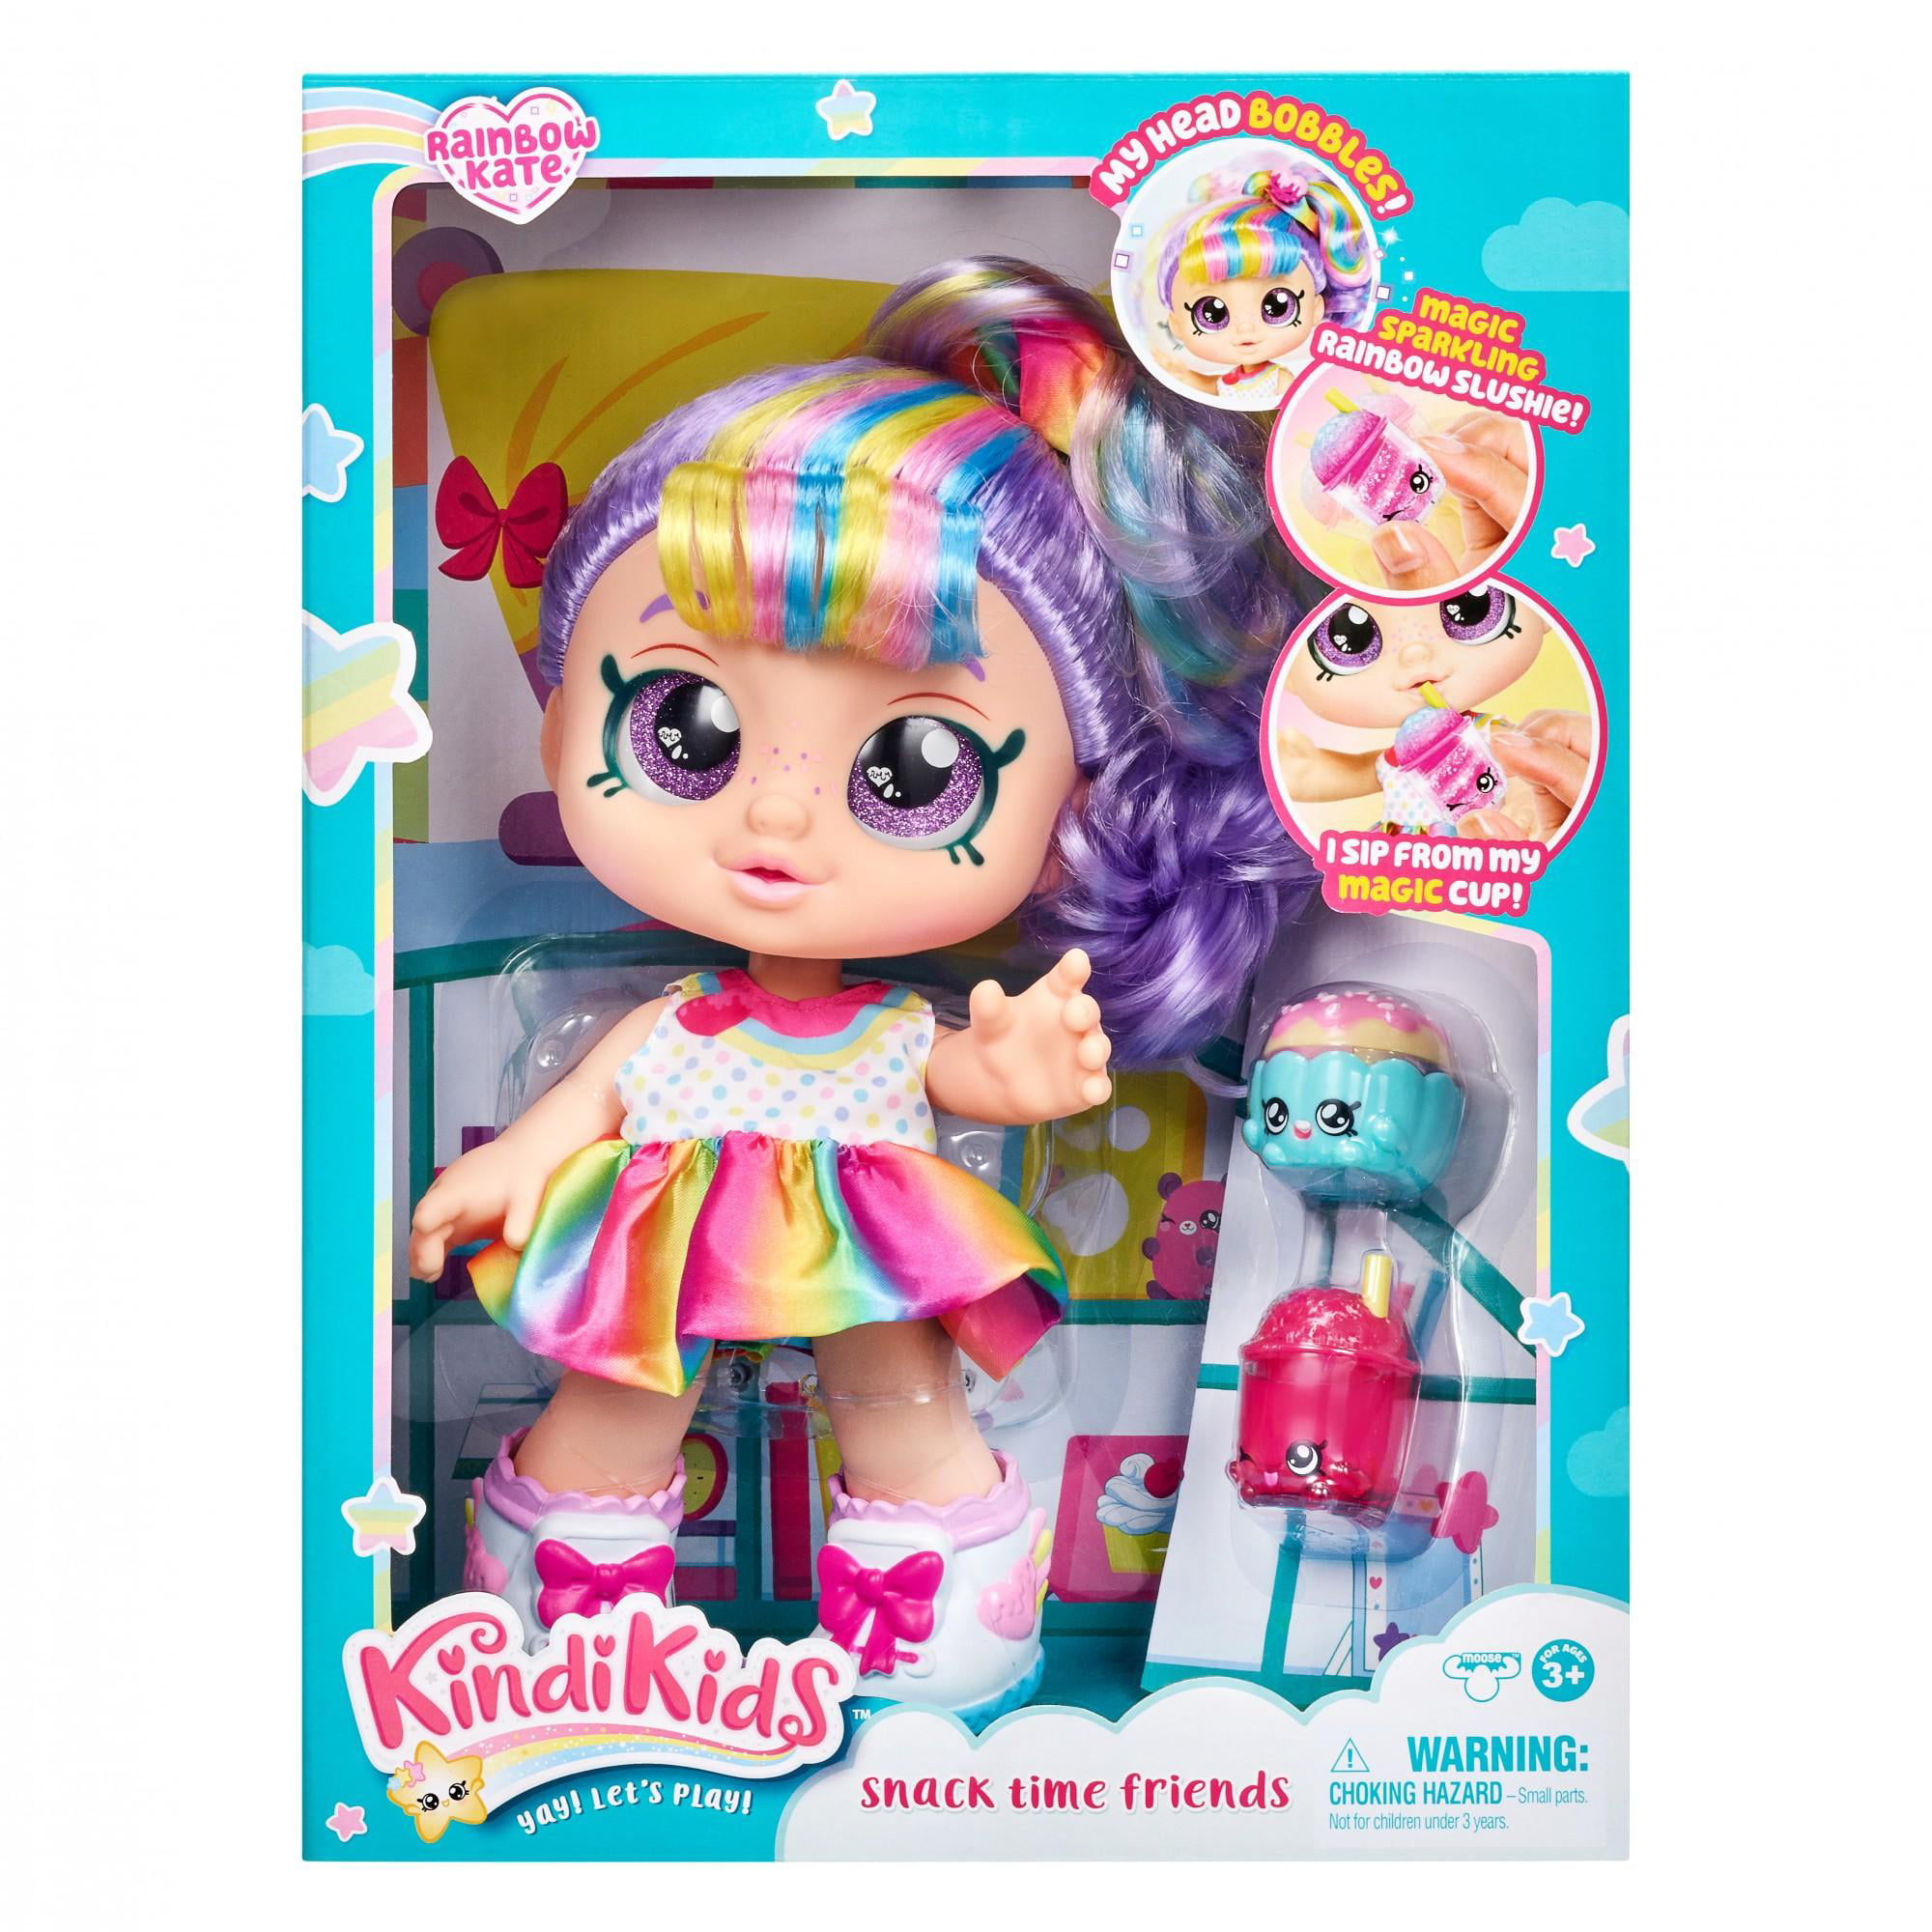 Details about  / Pre-School Play Doll Rainbow Kate Kids Interactive Imaginative Toy Playset New